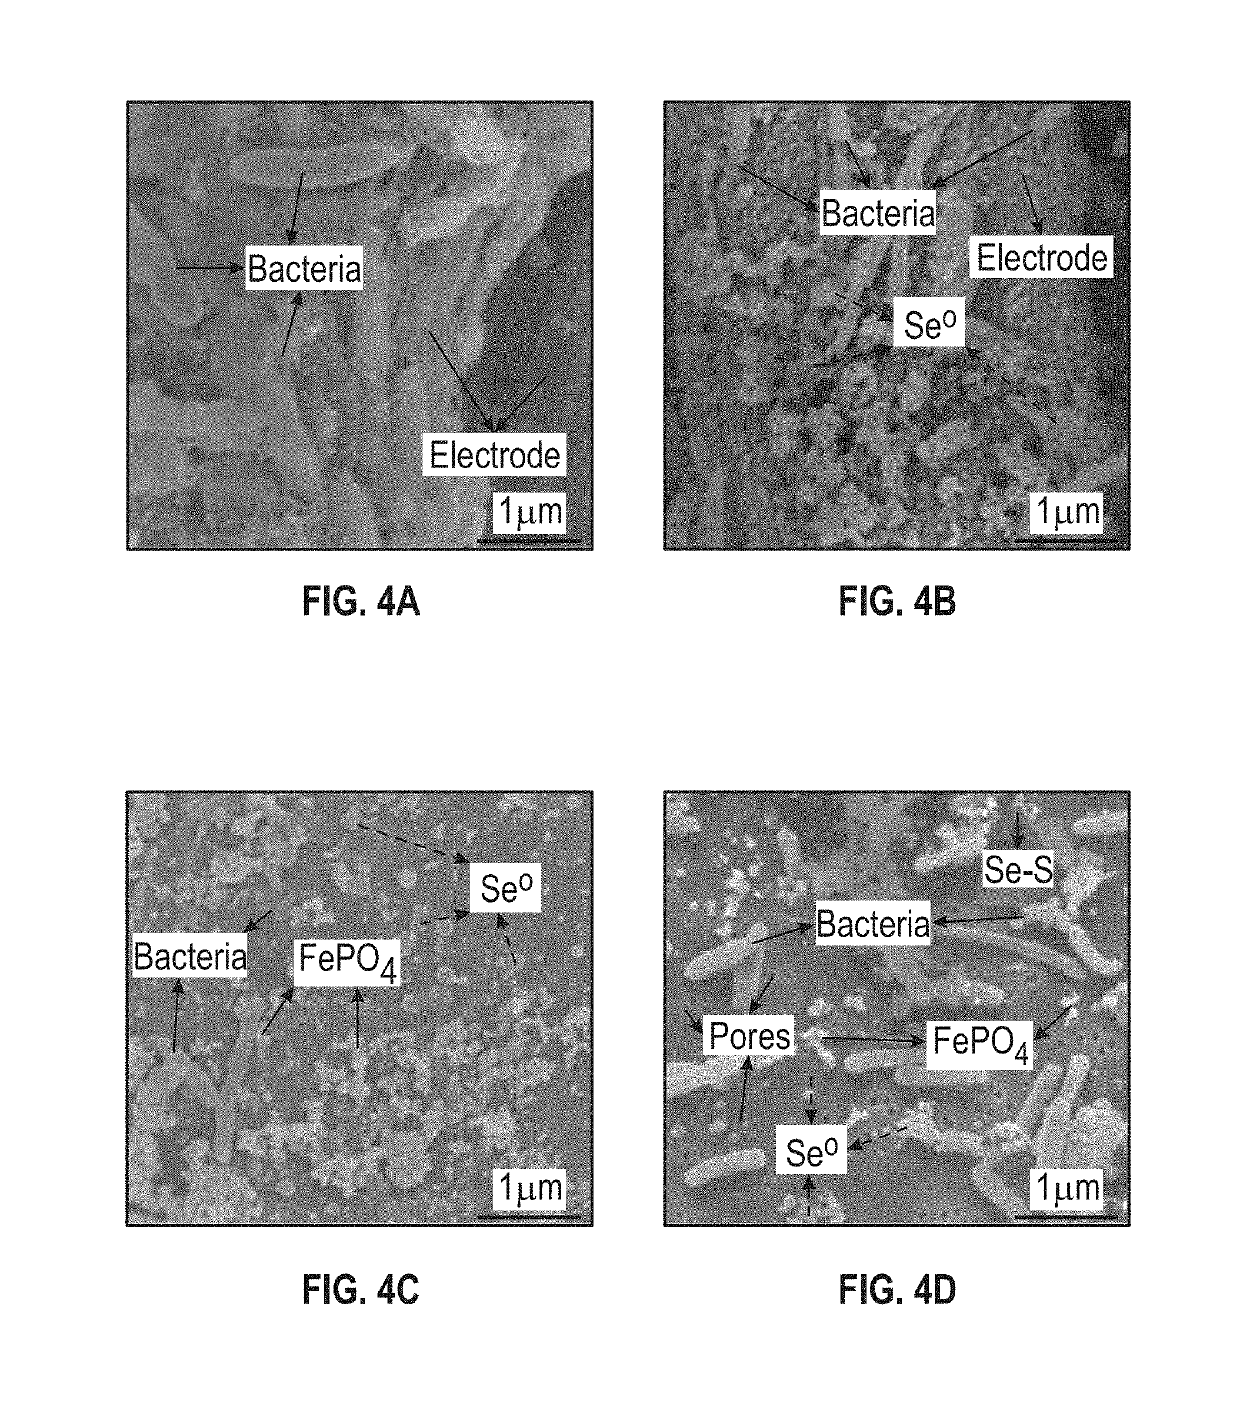 Reactors and methods for producing and recovering extracellular metal or metalloid nanoparticles